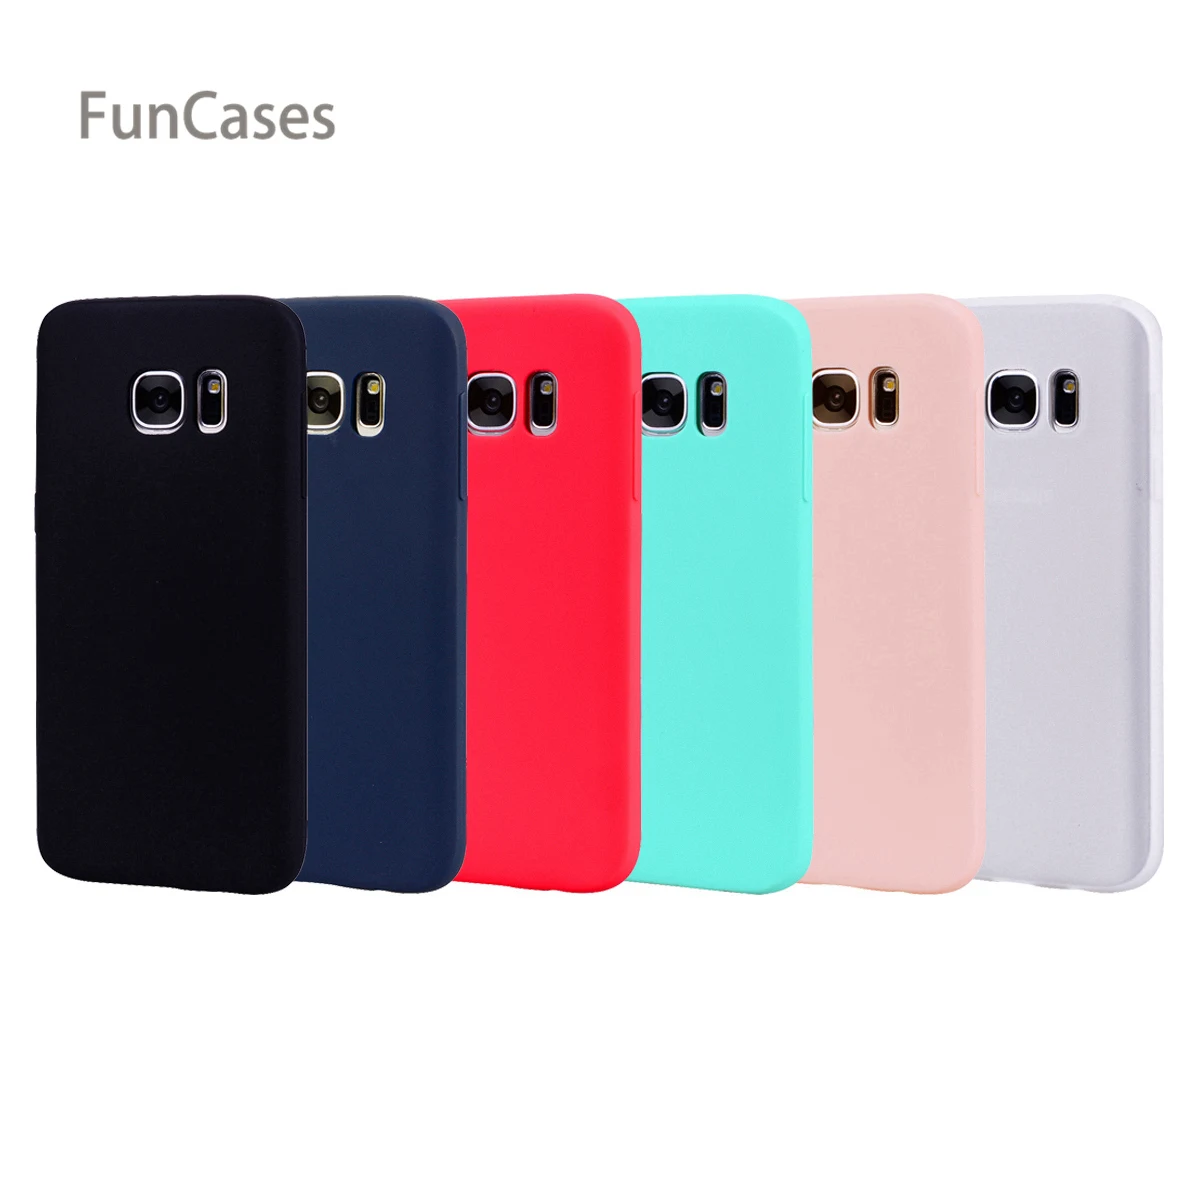 Phone | Back Cover Case | Mobile Phone Cases Covers - Slim Case Samsung S7 Edge - Aliexpress